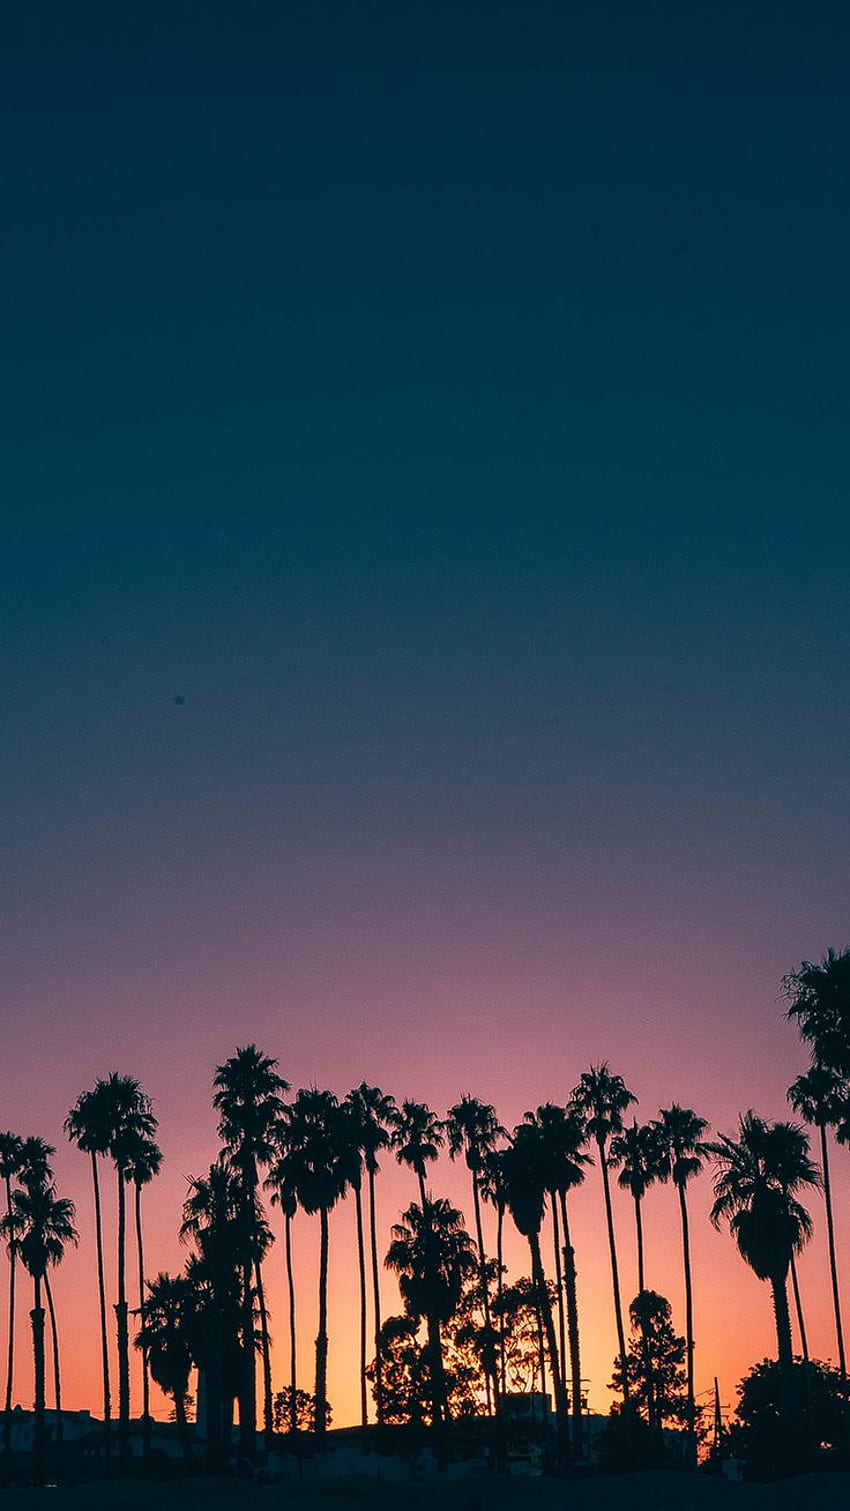 Summer Sunset iPhone To Kill That Winter Depression. Preppy, Palm Tree Sunset HD phone wallpaper